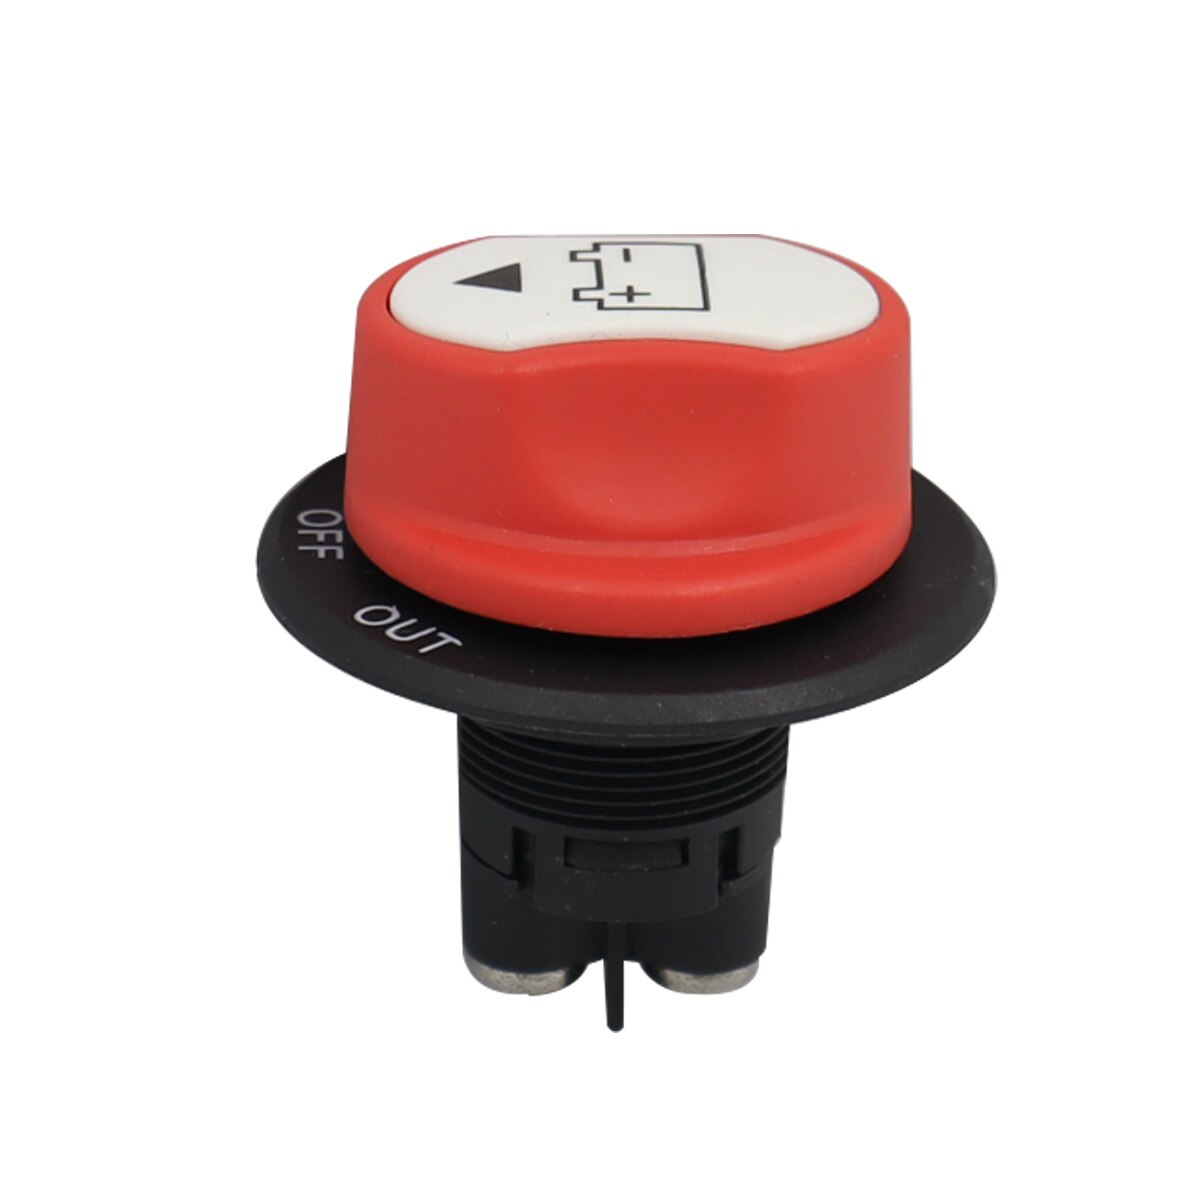 Battery Isolator Selector Switch for Boat,Waterproof Battery Master Disconnect Switch Power Cut/Shut Off Kill Switch Max DC 50V